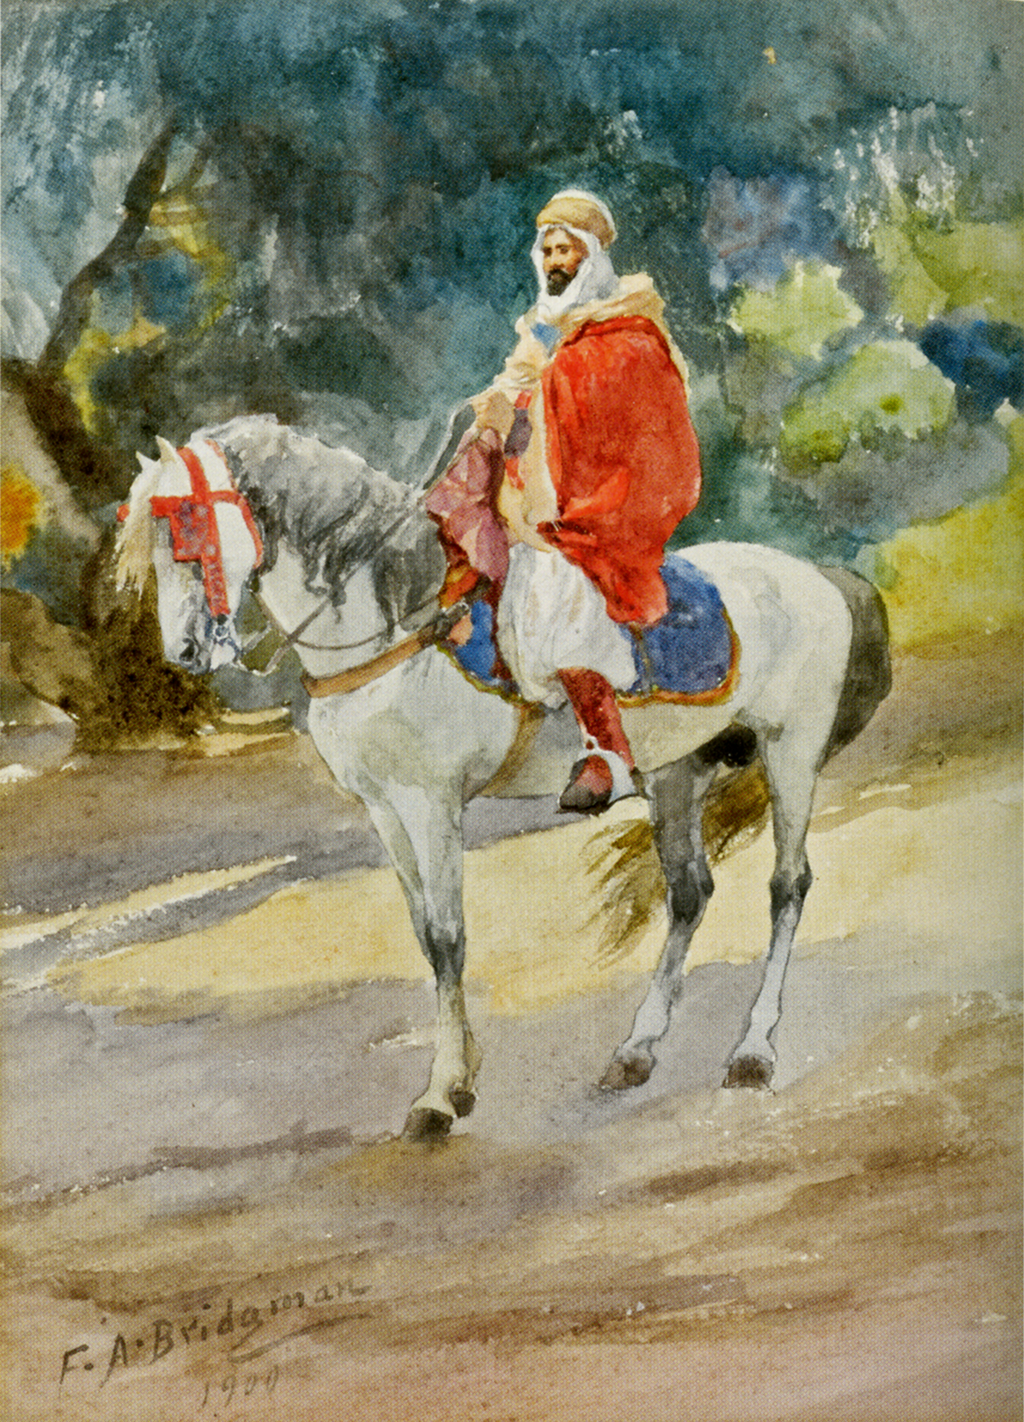 A painting of a man wearing a bright red cloak and white hood. He sits on a white horse with a blue saddle. Behind him is a green background, as the horse stands on a dirt road or path.